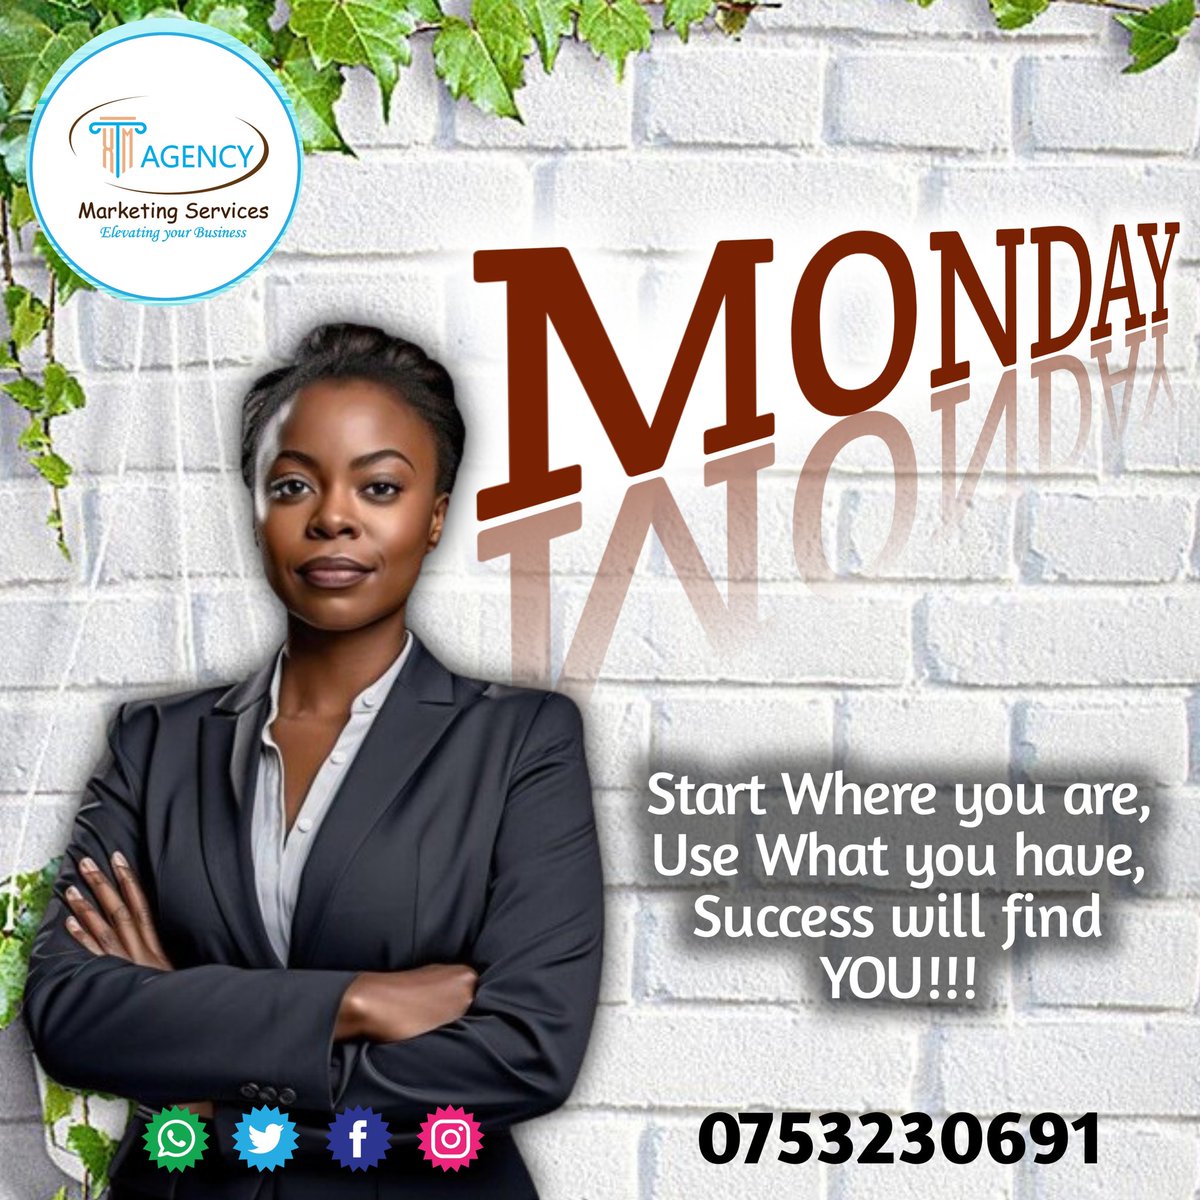 Happy Monday, everyone! Start the new week strong by leveraging your existing resources. Remember, we're here to support all your digital marketing needs. Reach out to us anytime on any of our social media Platforms!  Blessed New Week. #DigitalMarketing  #Elevatingyourbusiness